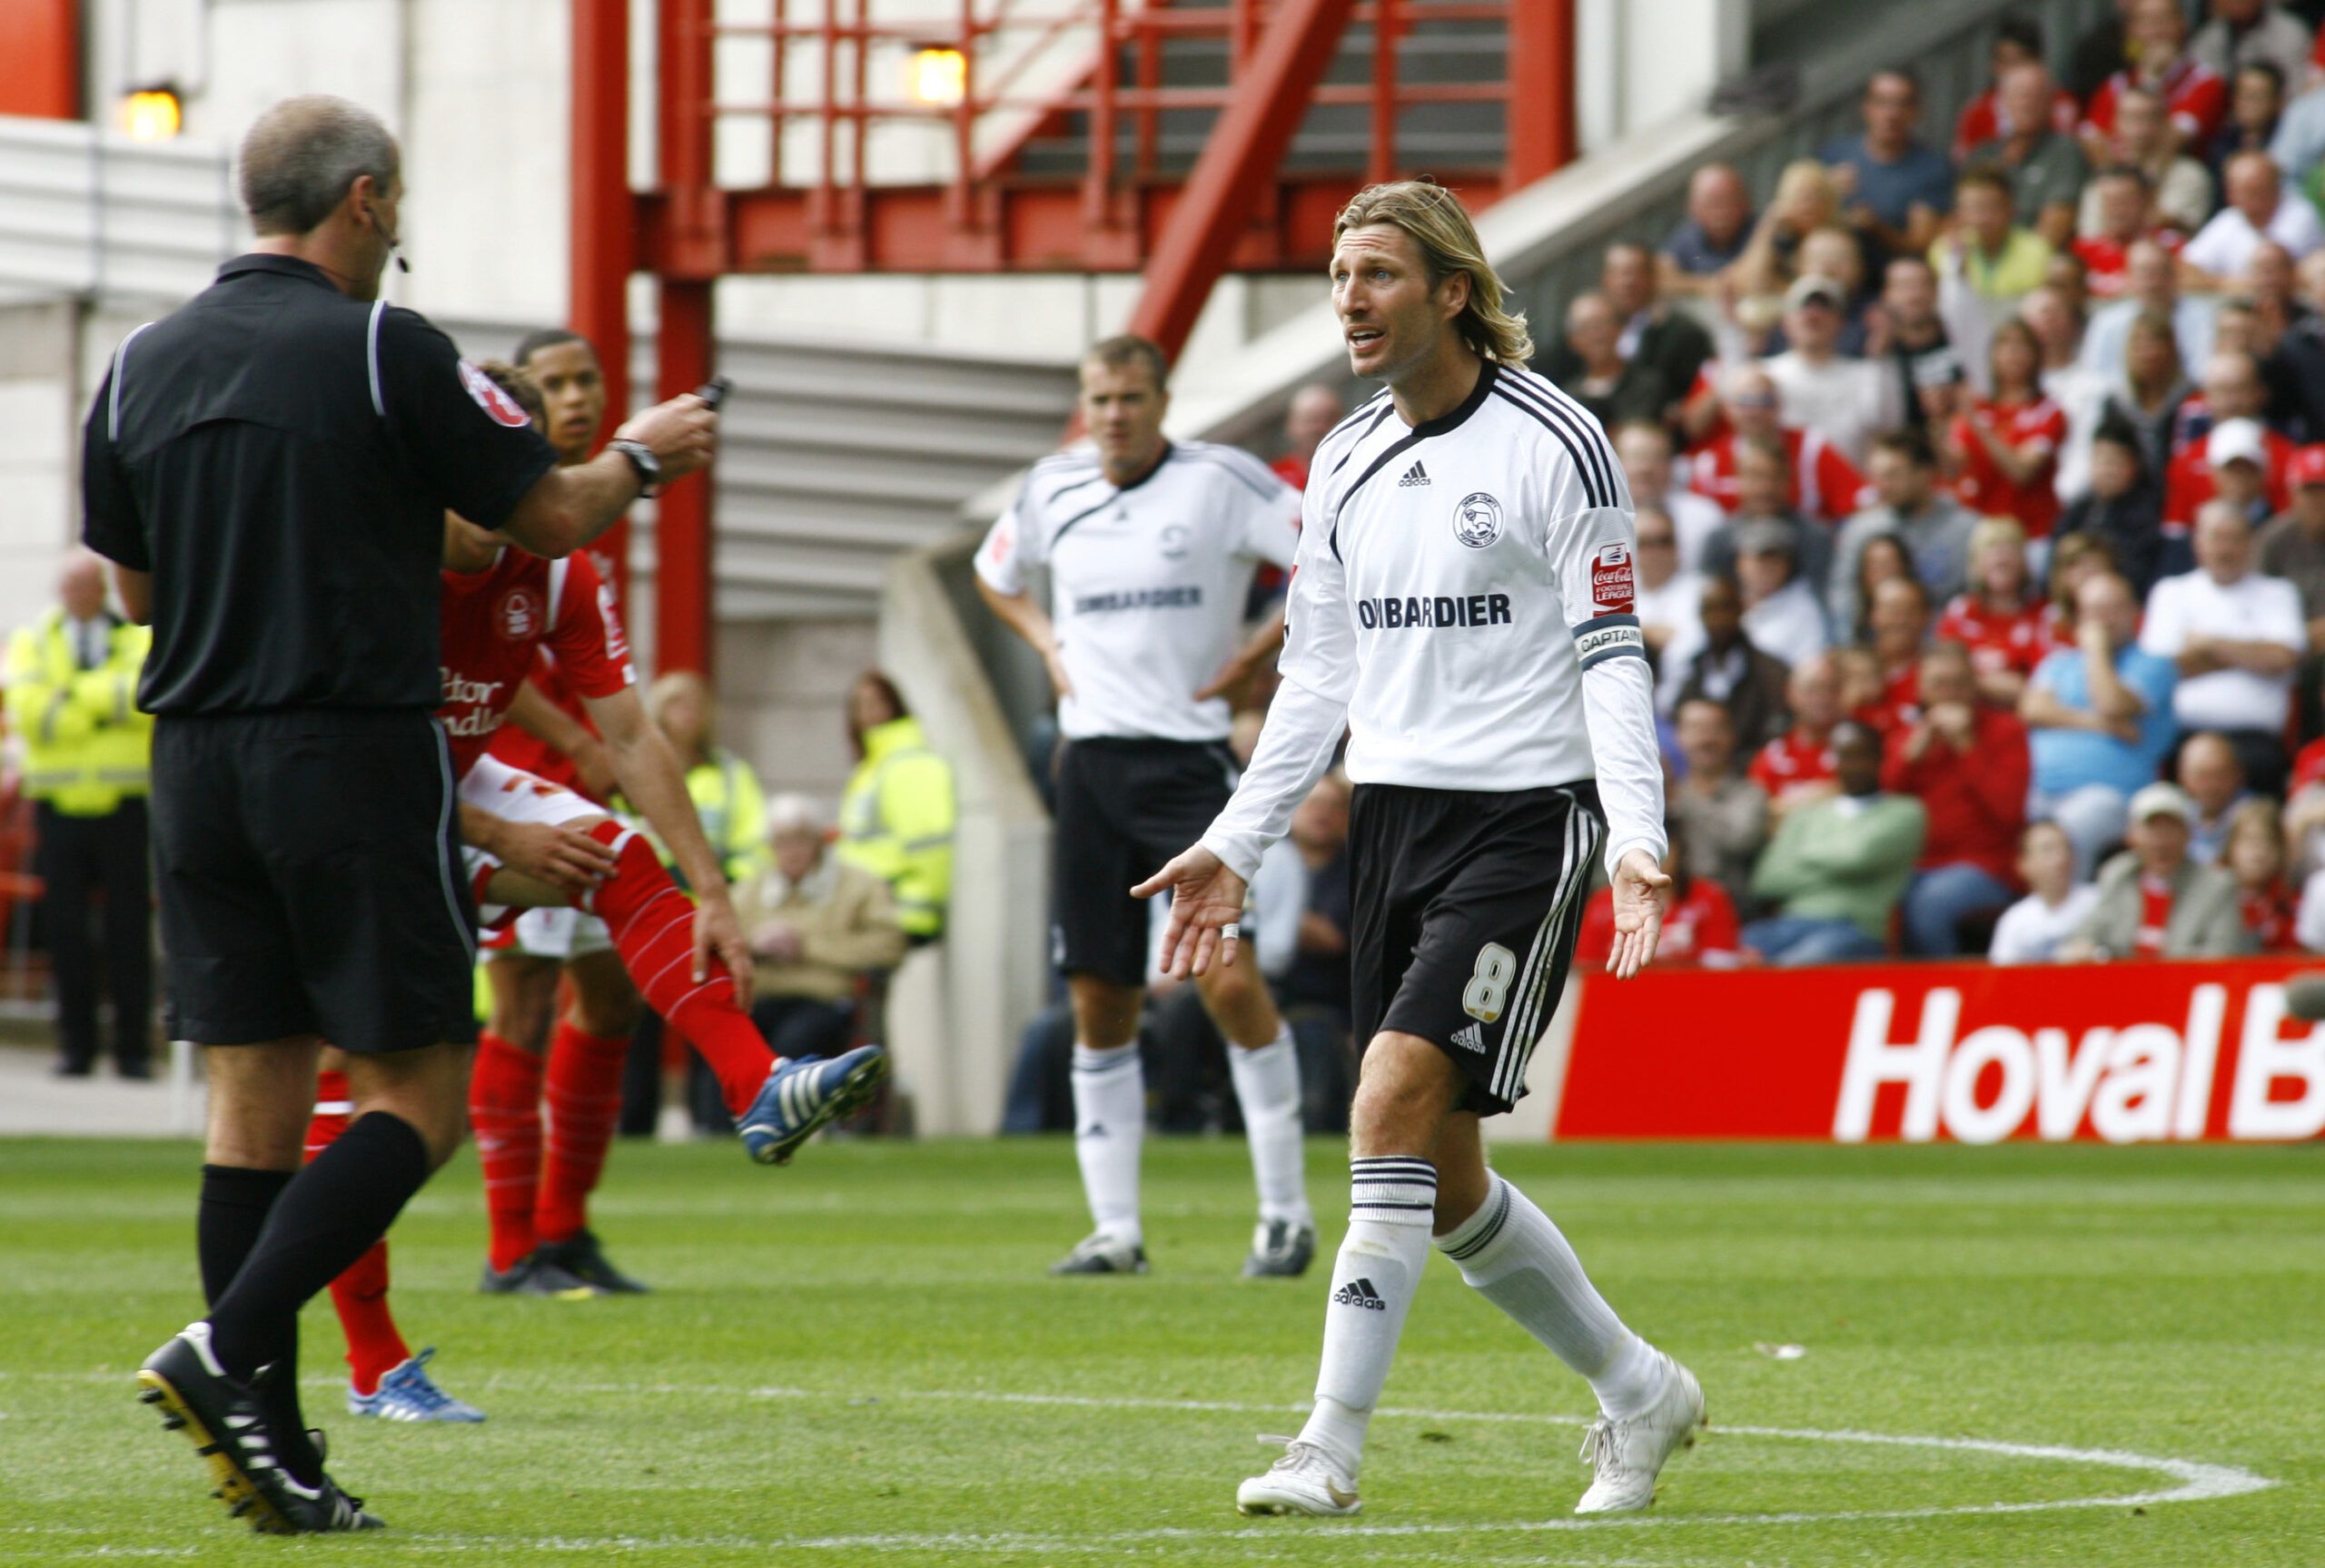 Football - Nottingham Forest v Derby County - Coca-Cola Football League Championship - The City Ground - 09/10 - 29/8/09 
Robbie Savage - Derby County remonstrates to Referee Martin Atkinson 
Mandatory Credit: Action Images / Paul Redding